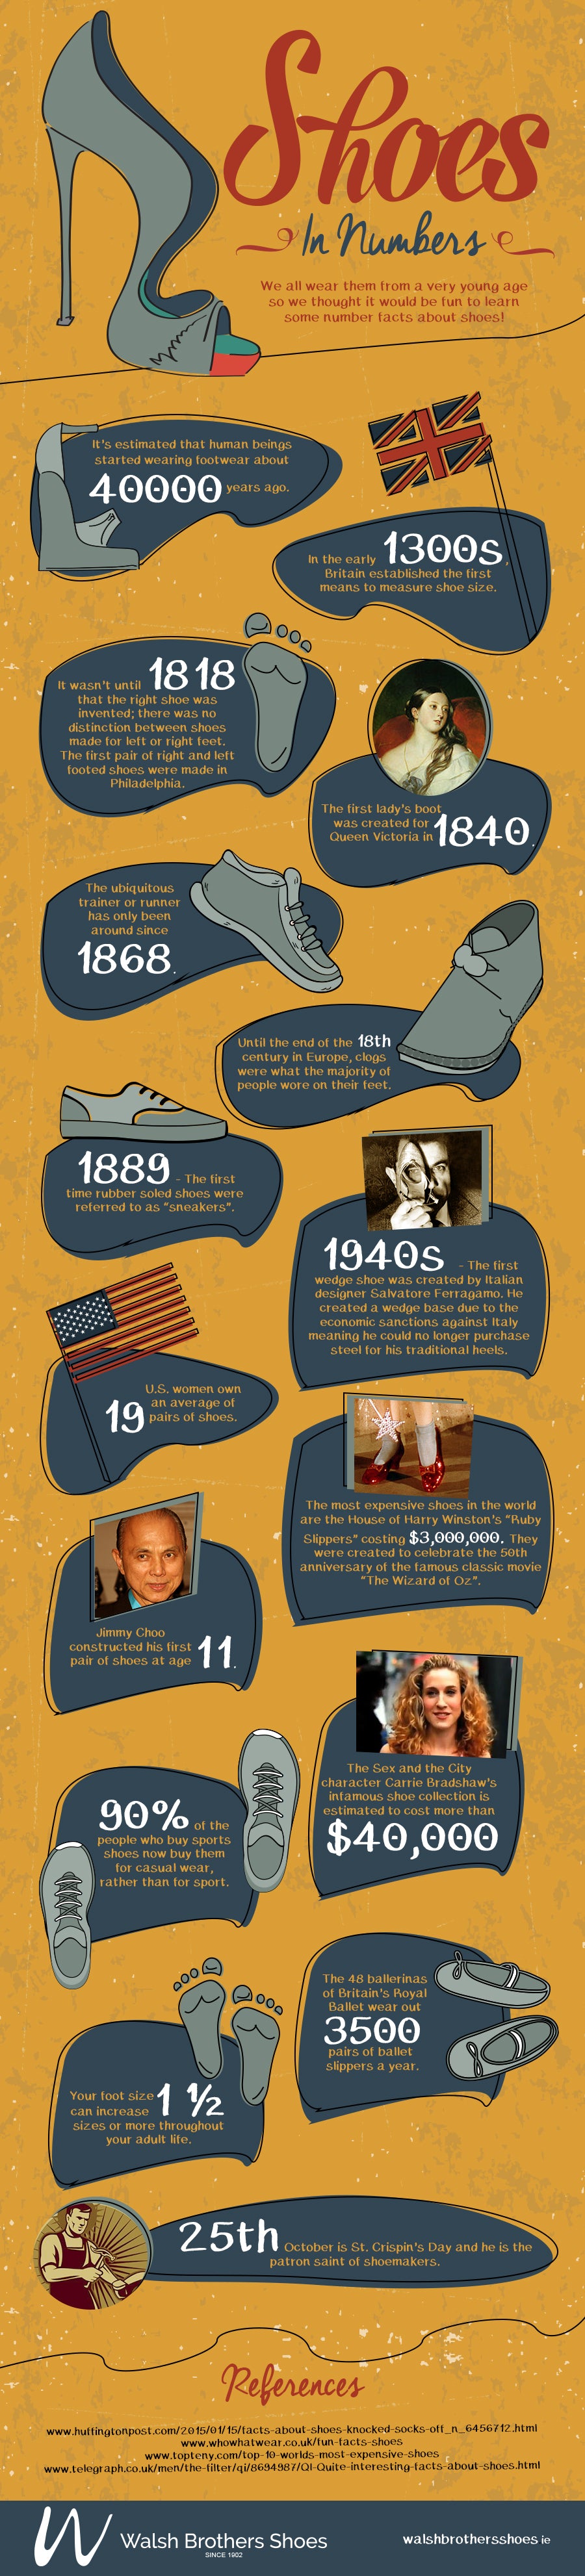 Shoe Facts - Infographic